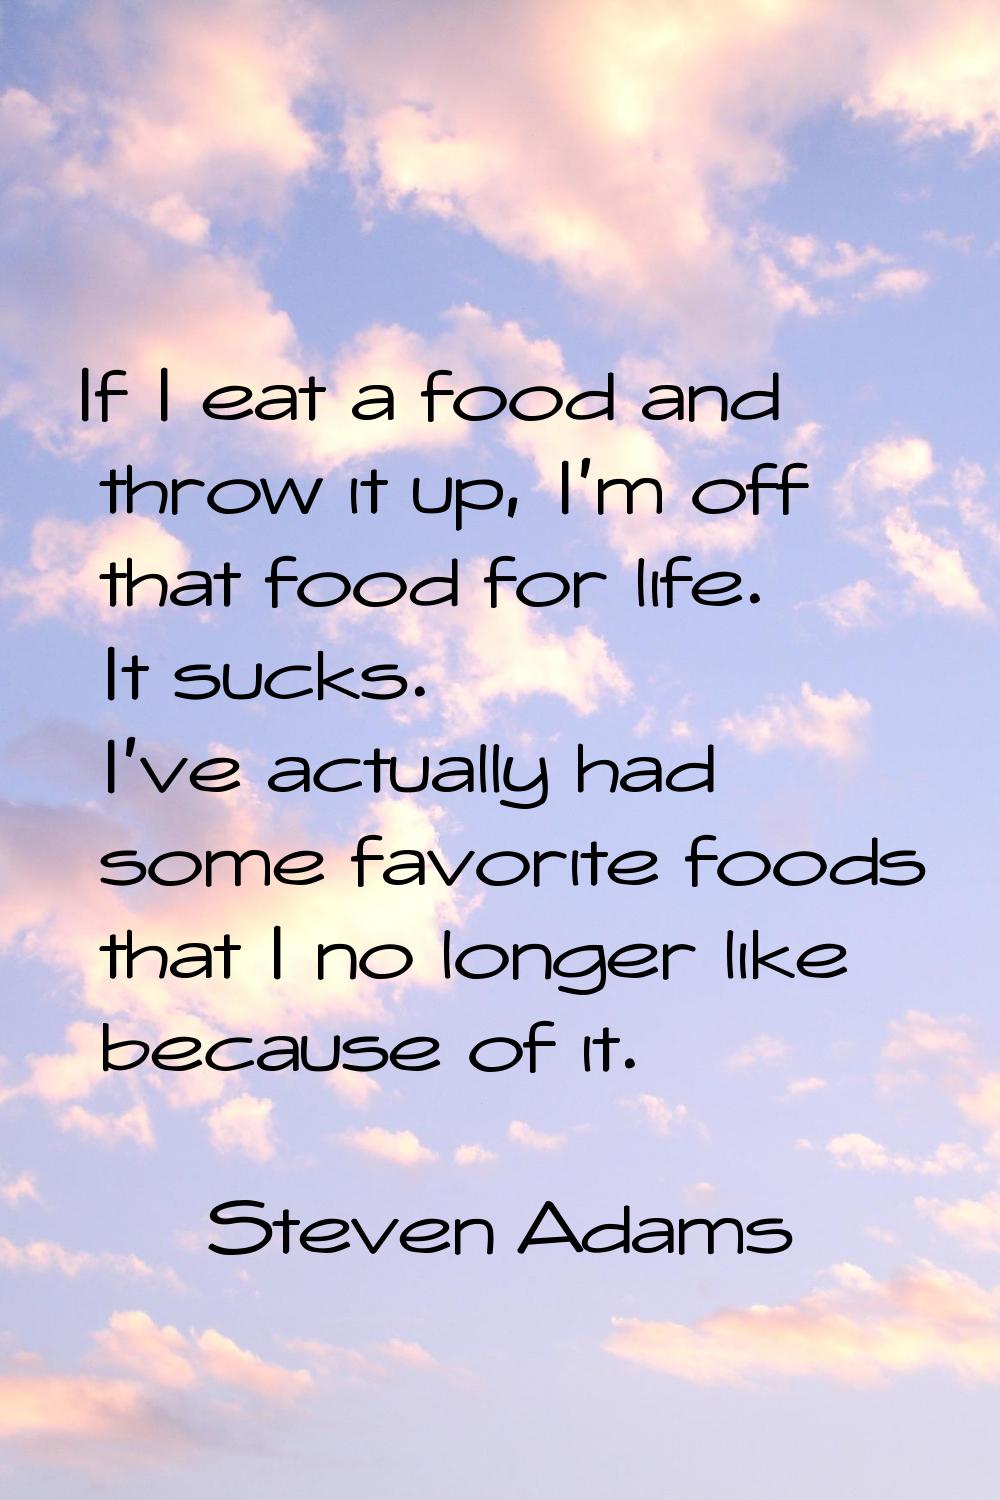 If I eat a food and throw it up, I'm off that food for life. It sucks. I've actually had some favor